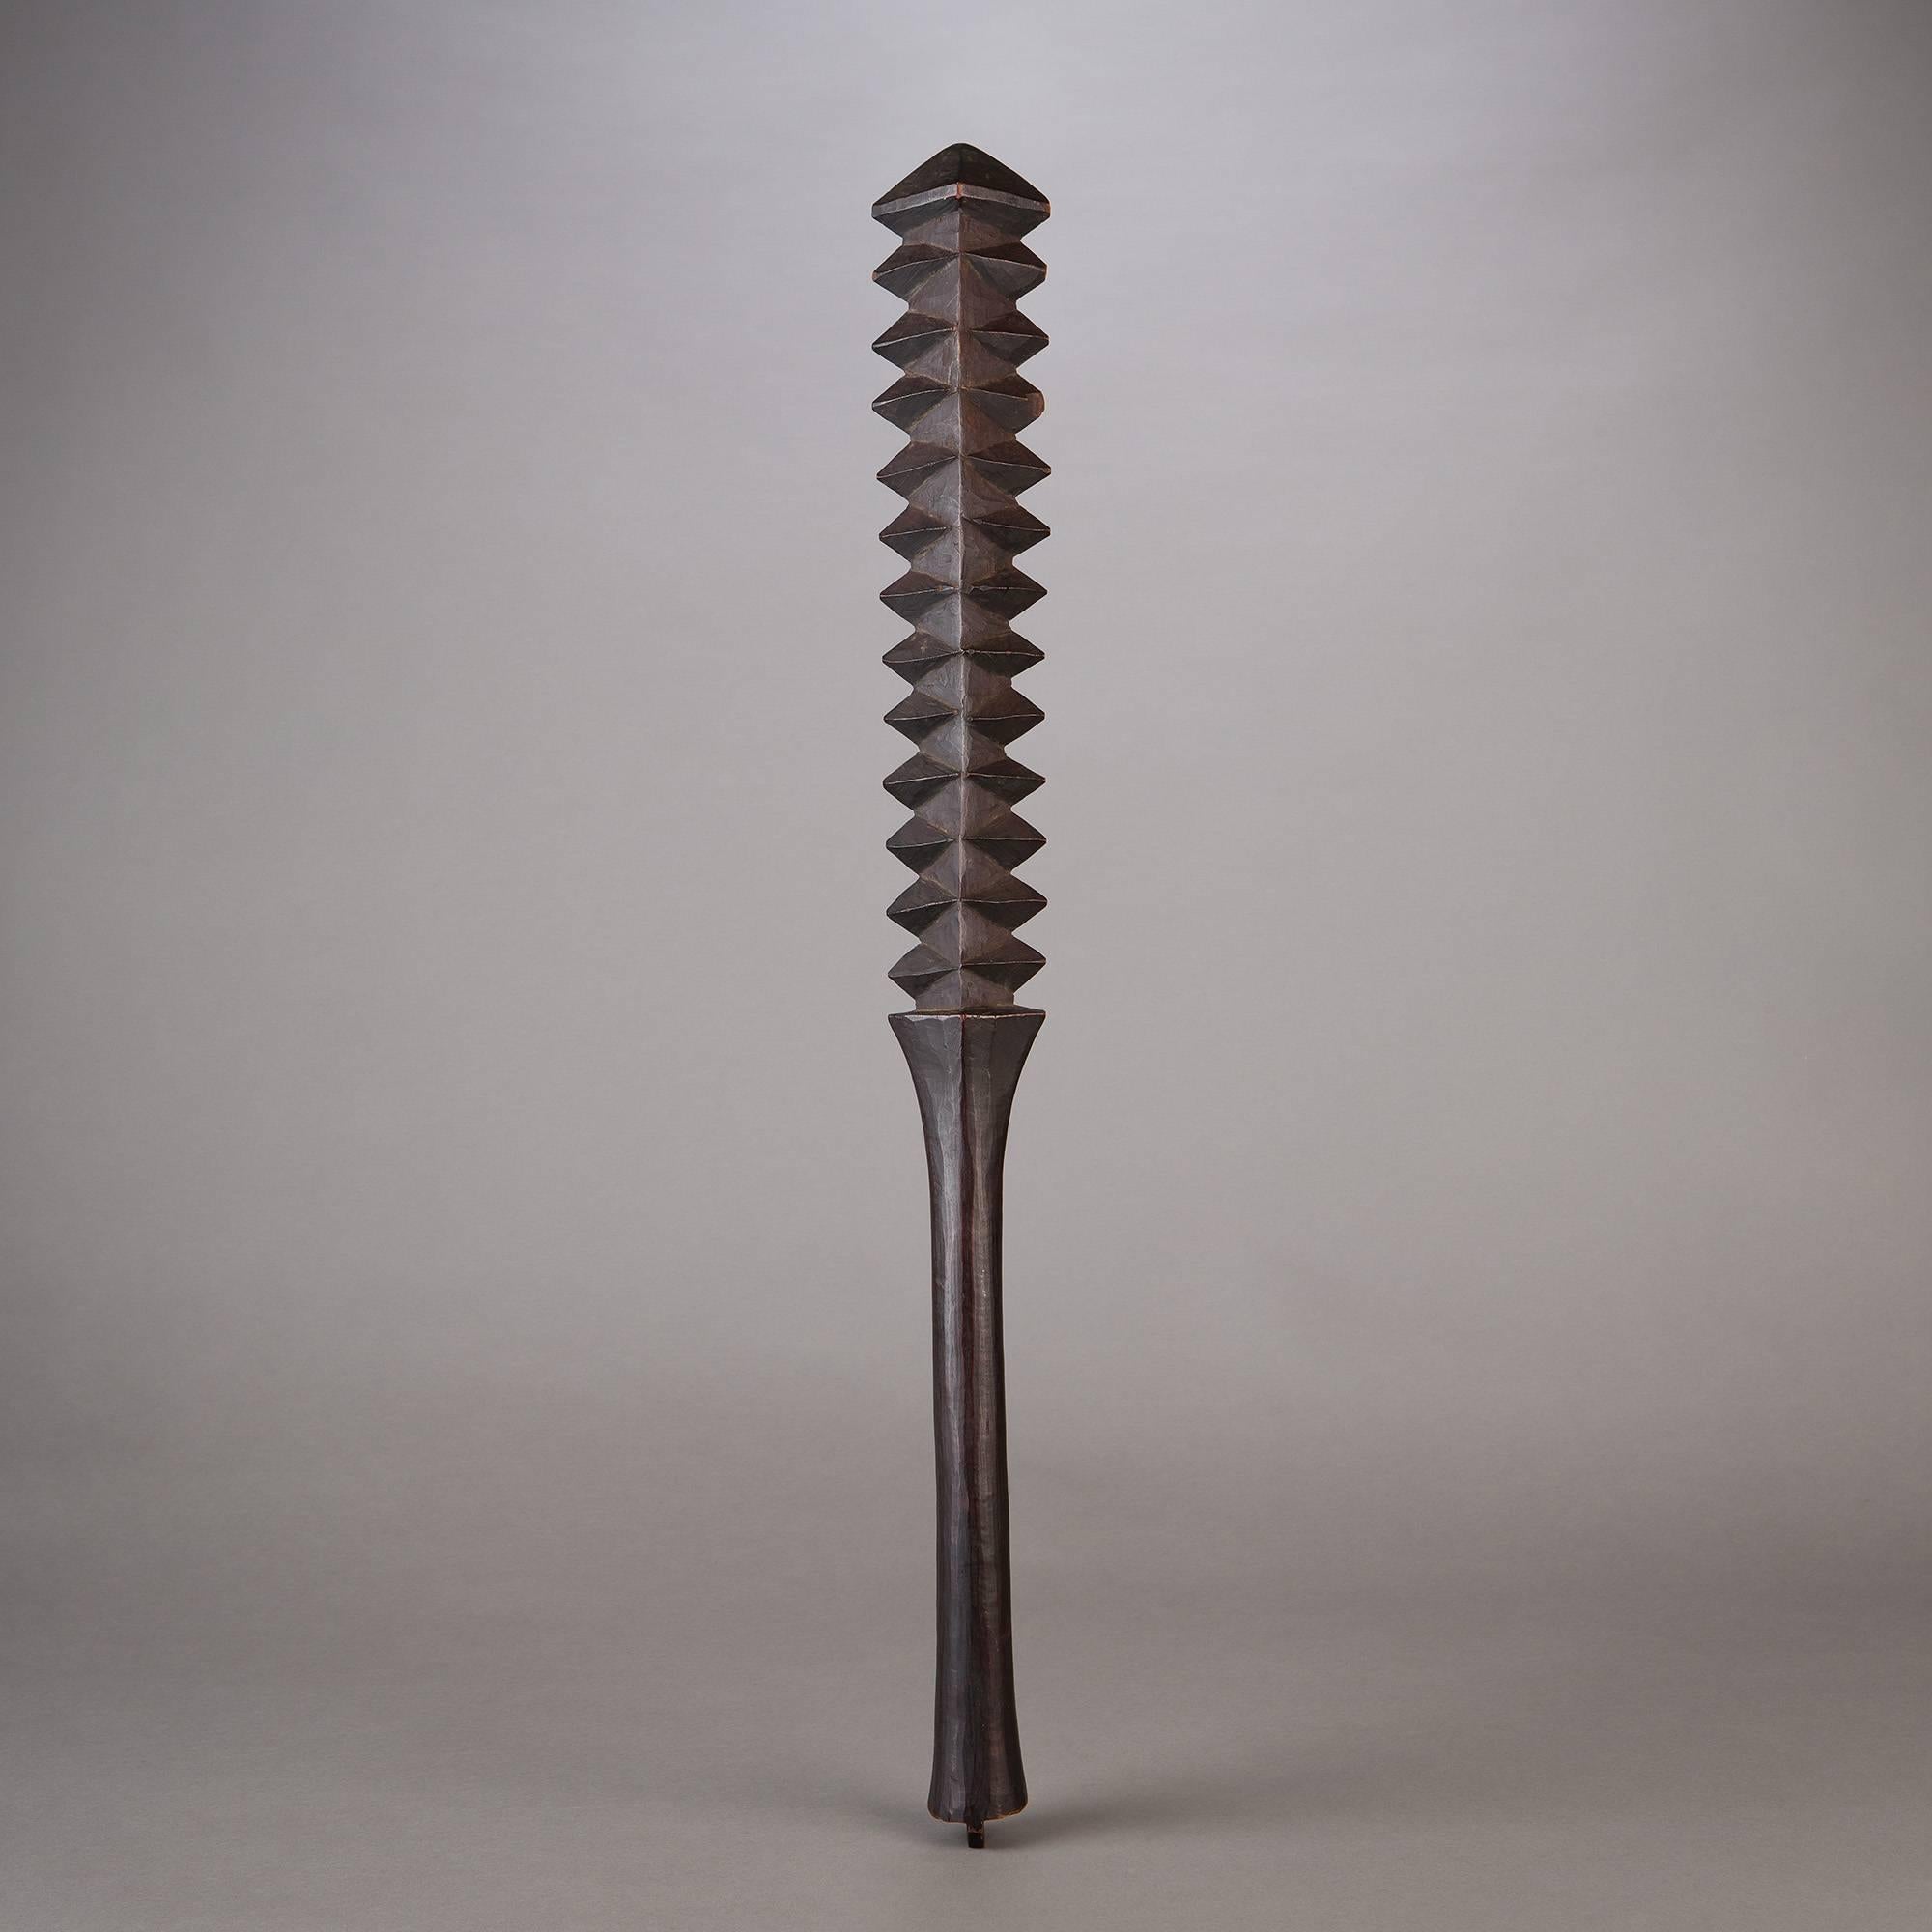 A well-formed club, or talavalu. The strict, angled symmetry and towering sculptural presence of this object give it amazing aesthetic power and contemporary appeal. Dark, dramatic patination from tip to tip only serves to add to this object's